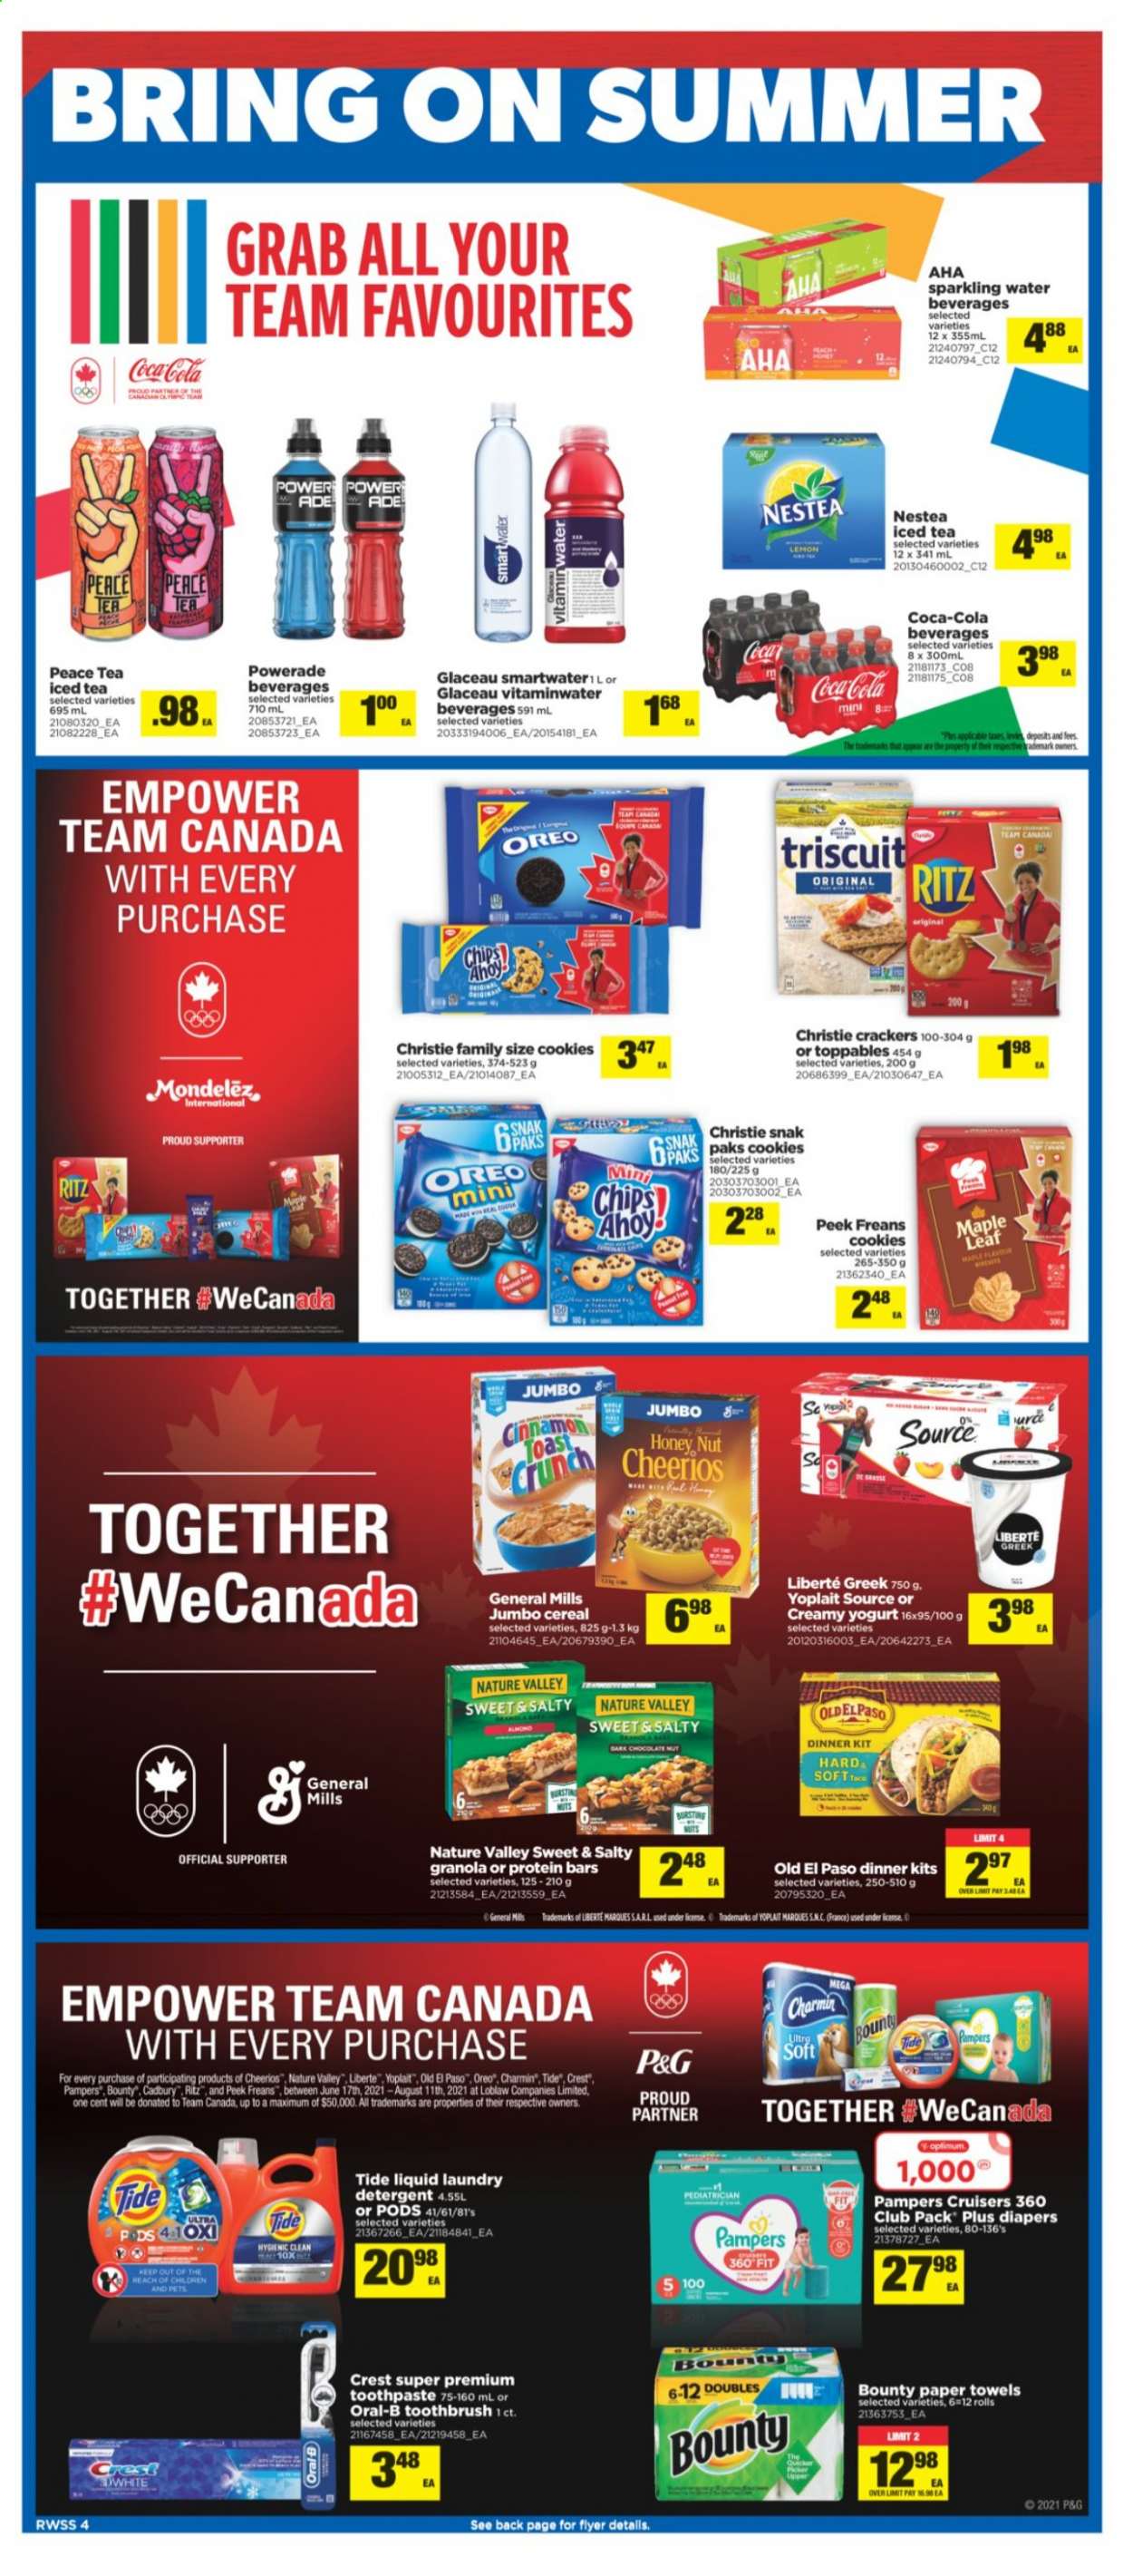 Real Canadian Superstore flyer  - July 23, 2021 - July 29, 2021.